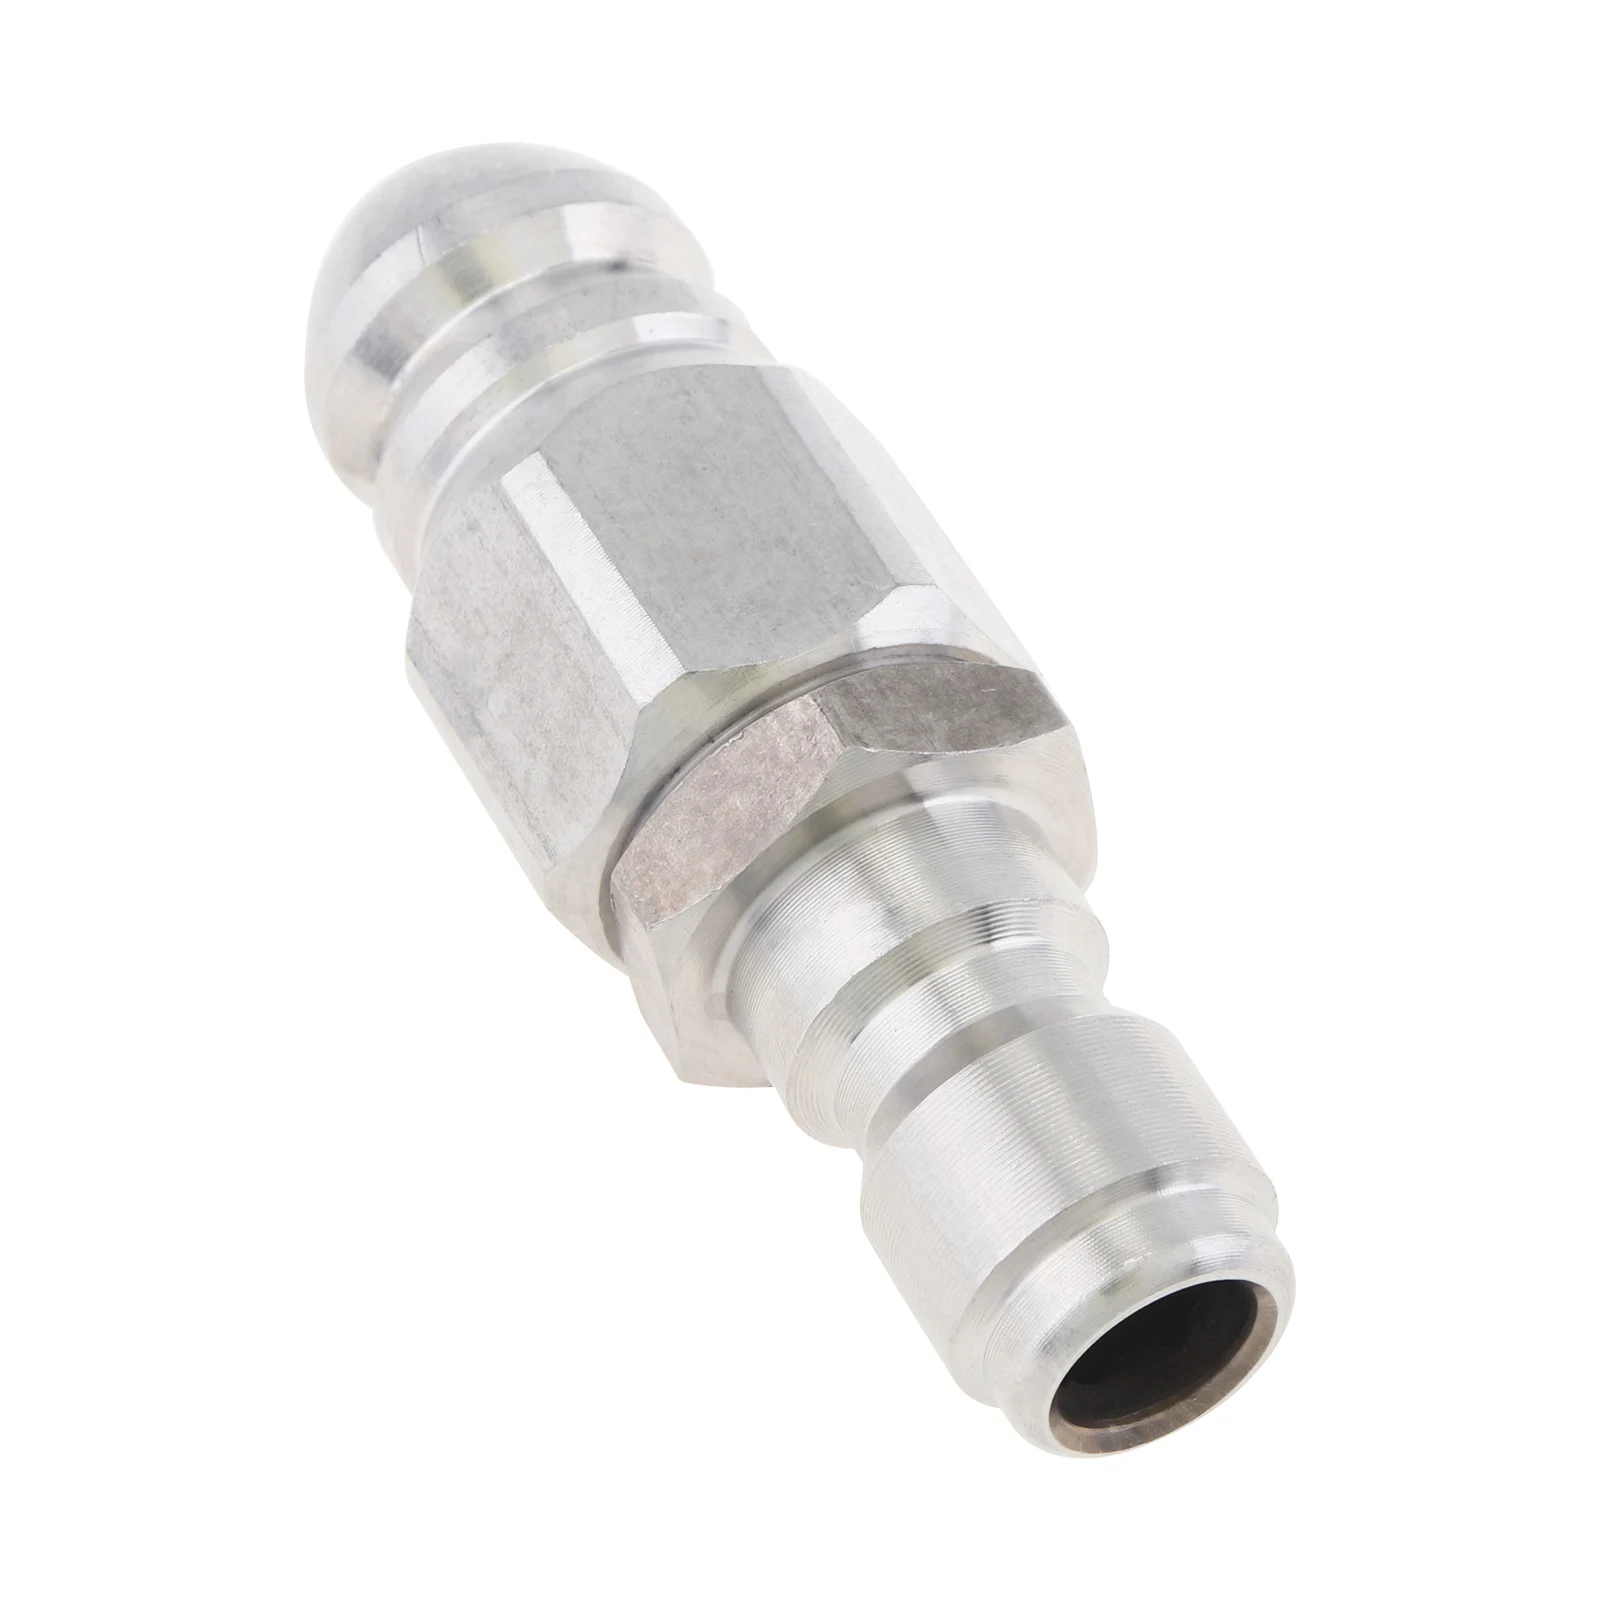 Pressure Washer Sewer Jetter Nozzle Mini Compact Quickly Connector for Drain Jetting Hose, Pressure Drain Jetter Hose Nozzle